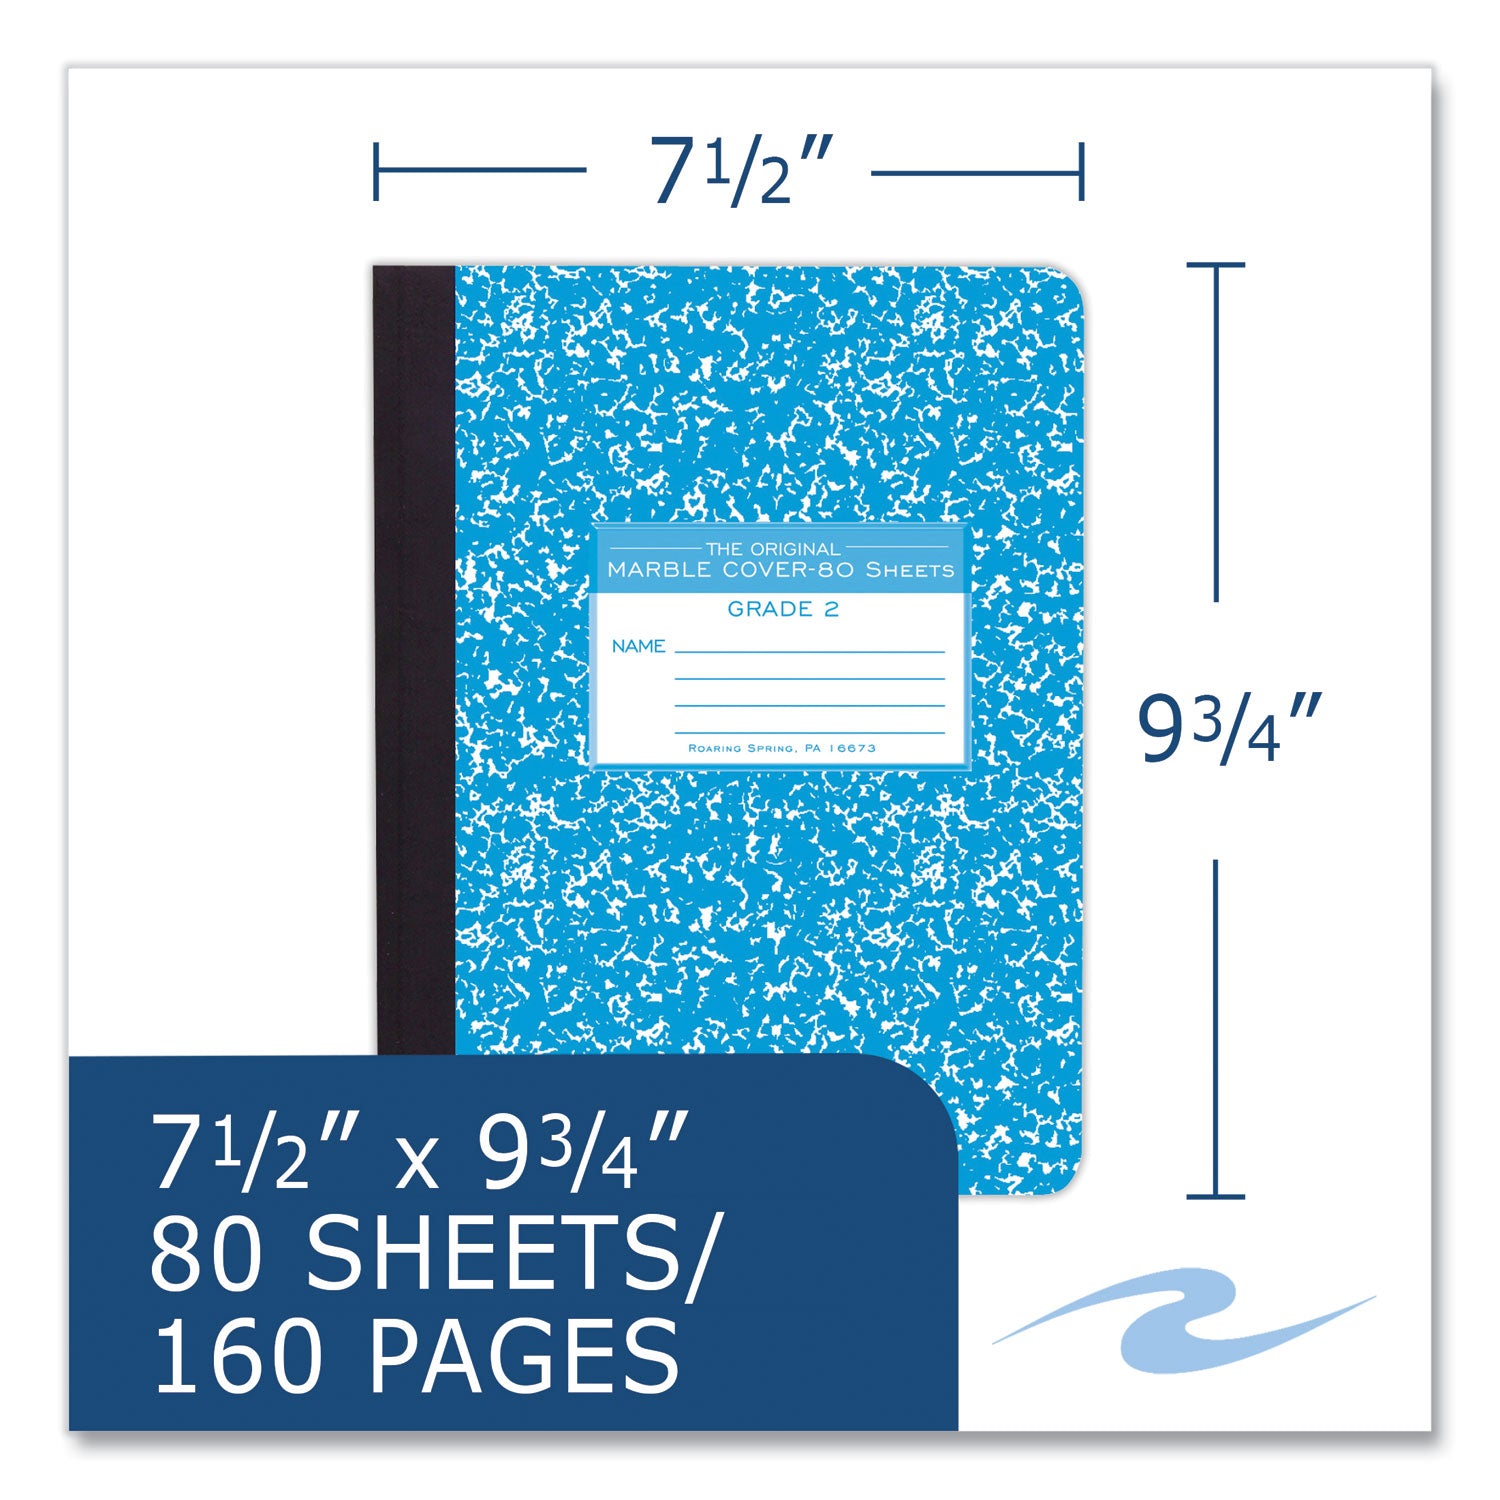 ruled-composition-book-grade-2-manuscript-format-blue-marble-cover-80-975-x-75-sheet-48-ct-ships-in-4-6-bus-days_roa97226cs - 8